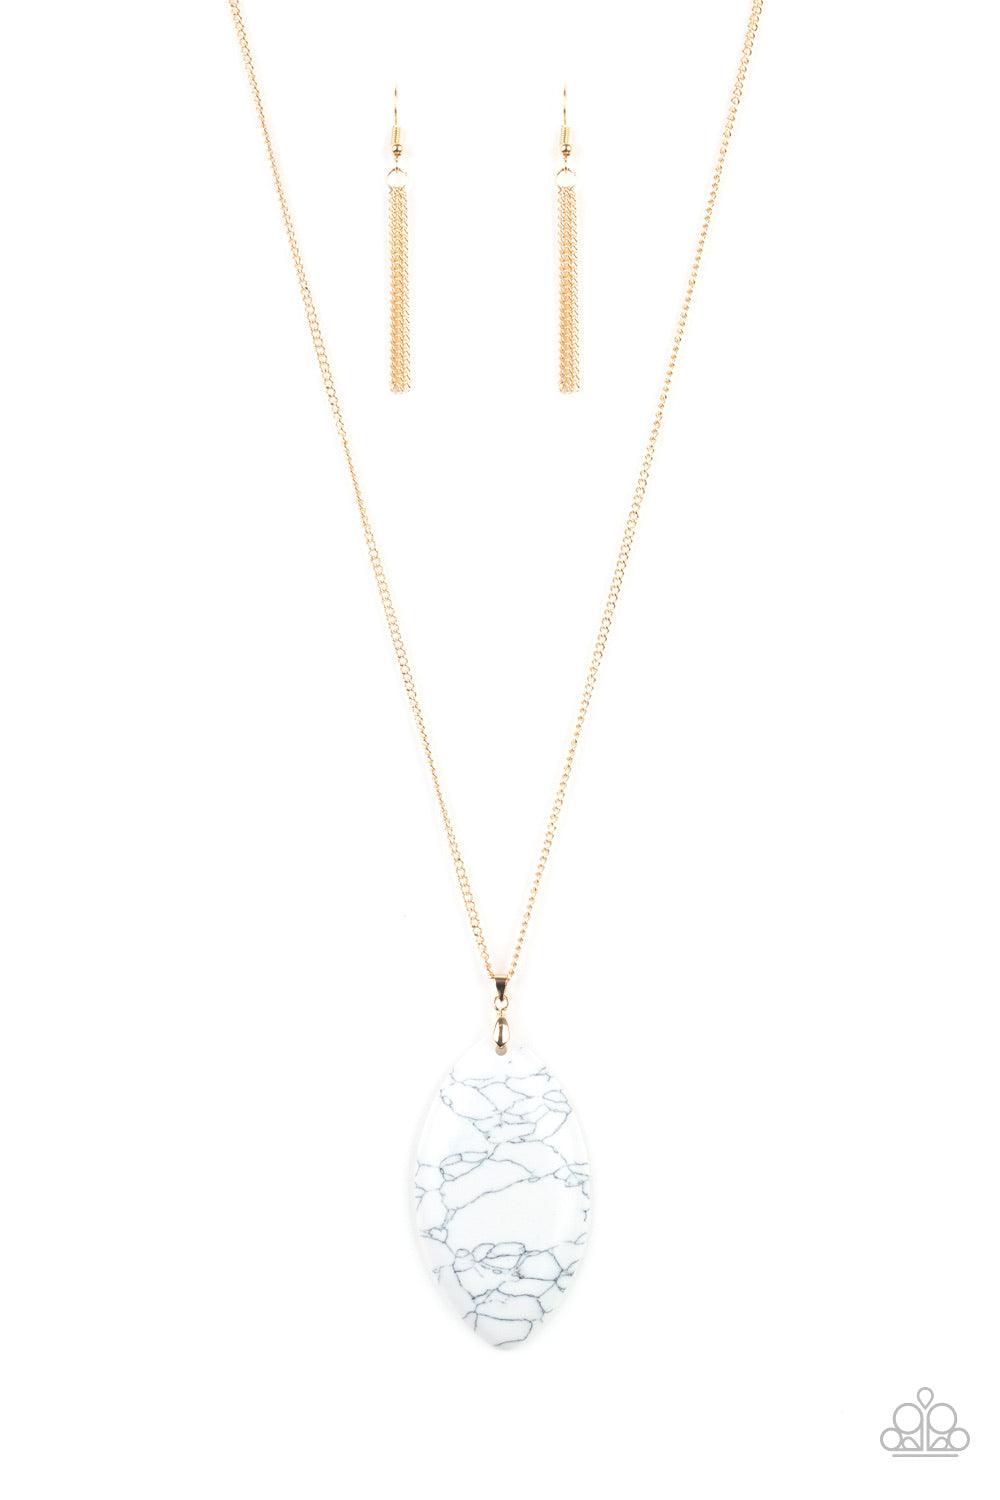 Paparazzi Accessories Santa Fe Simplicity - White Chiseled into a tranquil almond-shape, an oversized white stone pendant swings from the bottom of a lengthened gold chain in a seasonal fashion. Features an adjustable clasp closure. Jewelry